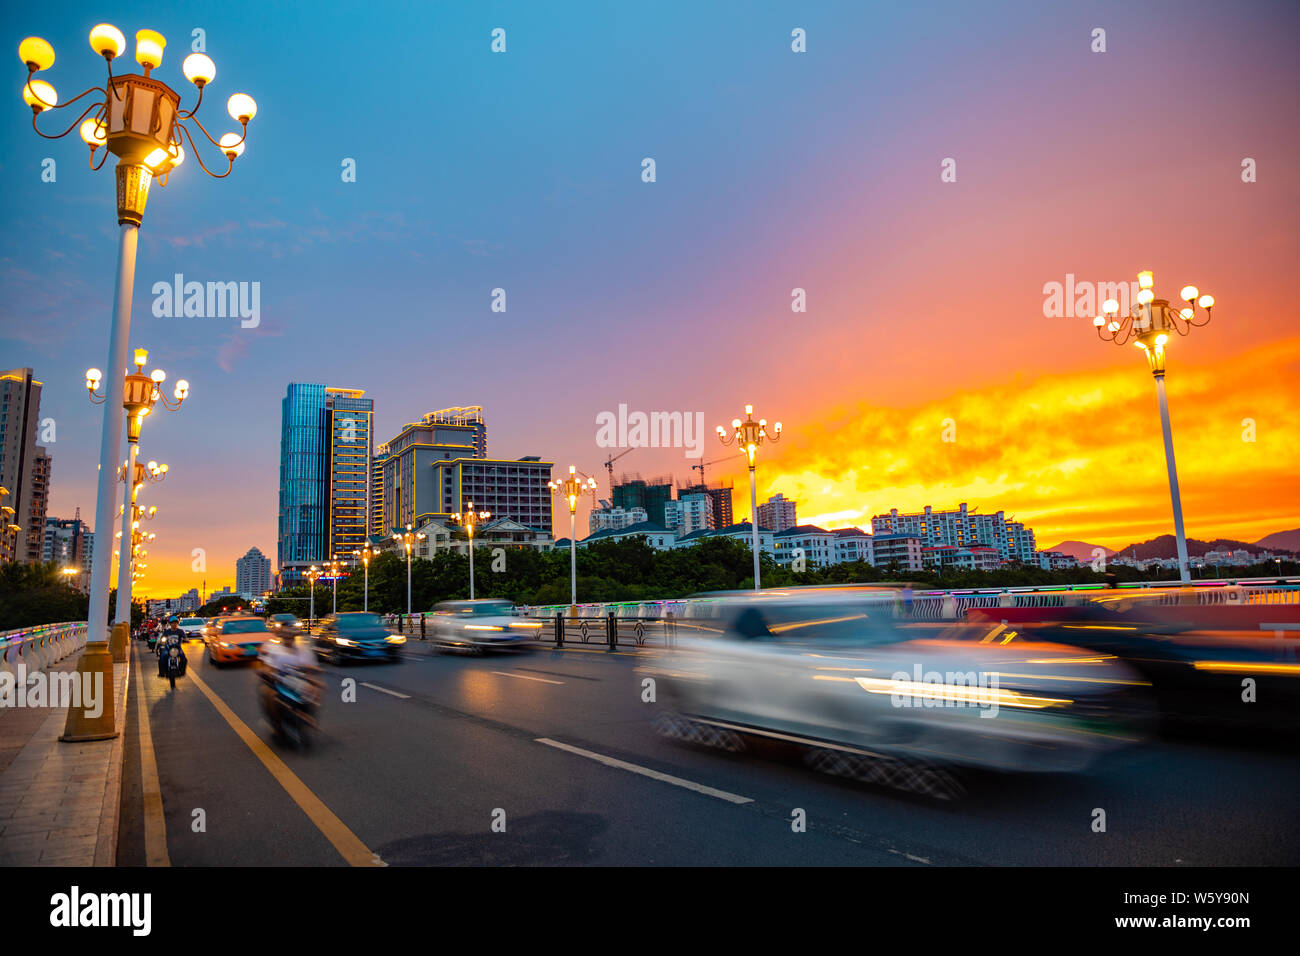 Sanya, Hainan, China - 26.06.2019: Sanya Cityscape with busy road and  Buildings in the sunset time, Hainan Province, China Stock Photo - Alamy